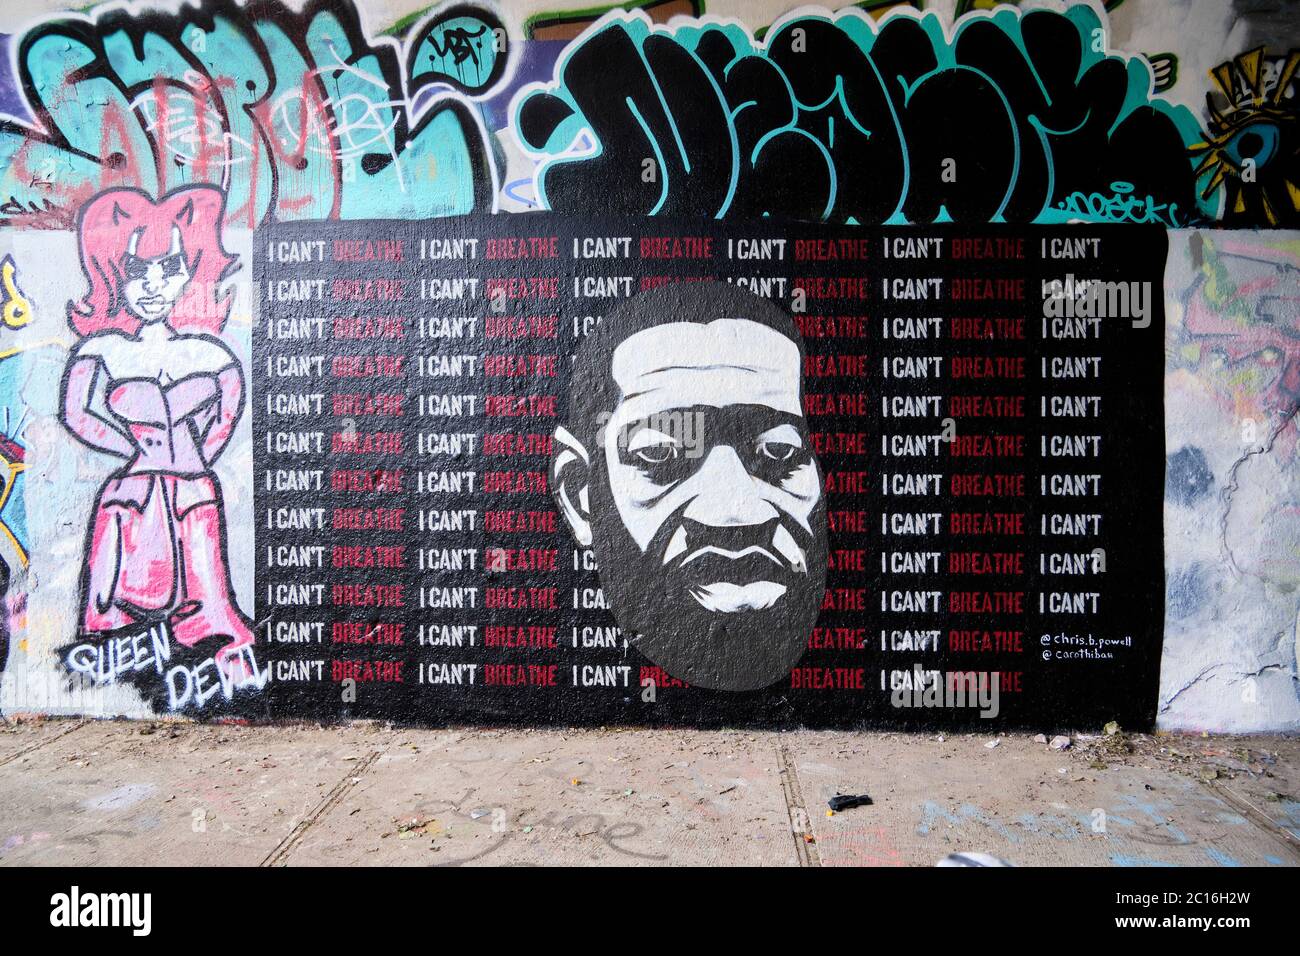 Montreal, Quebec, Canada. June 14th, 2020. New George Floyd “I can't breathe” mural appearing in the Rouen legal graffiti wall in the East end of Montreal. The art follows weeks of Black Lives matters protests around the world. The art was created by Christopher Powell and Caroline Thibault. Credit: meanderingemu/Alamy Live News Stock Photo